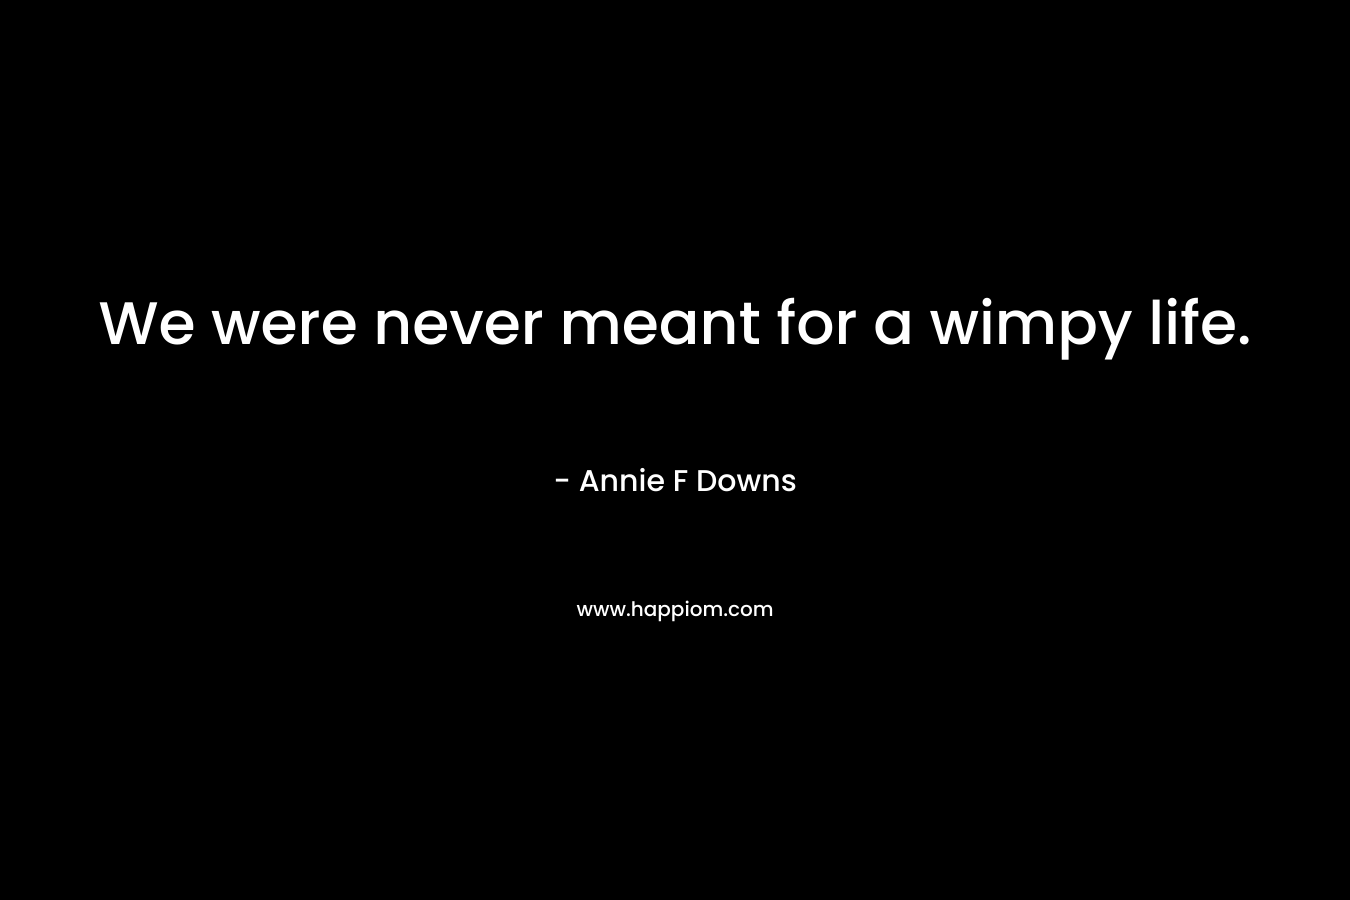 We were never meant for a wimpy life.